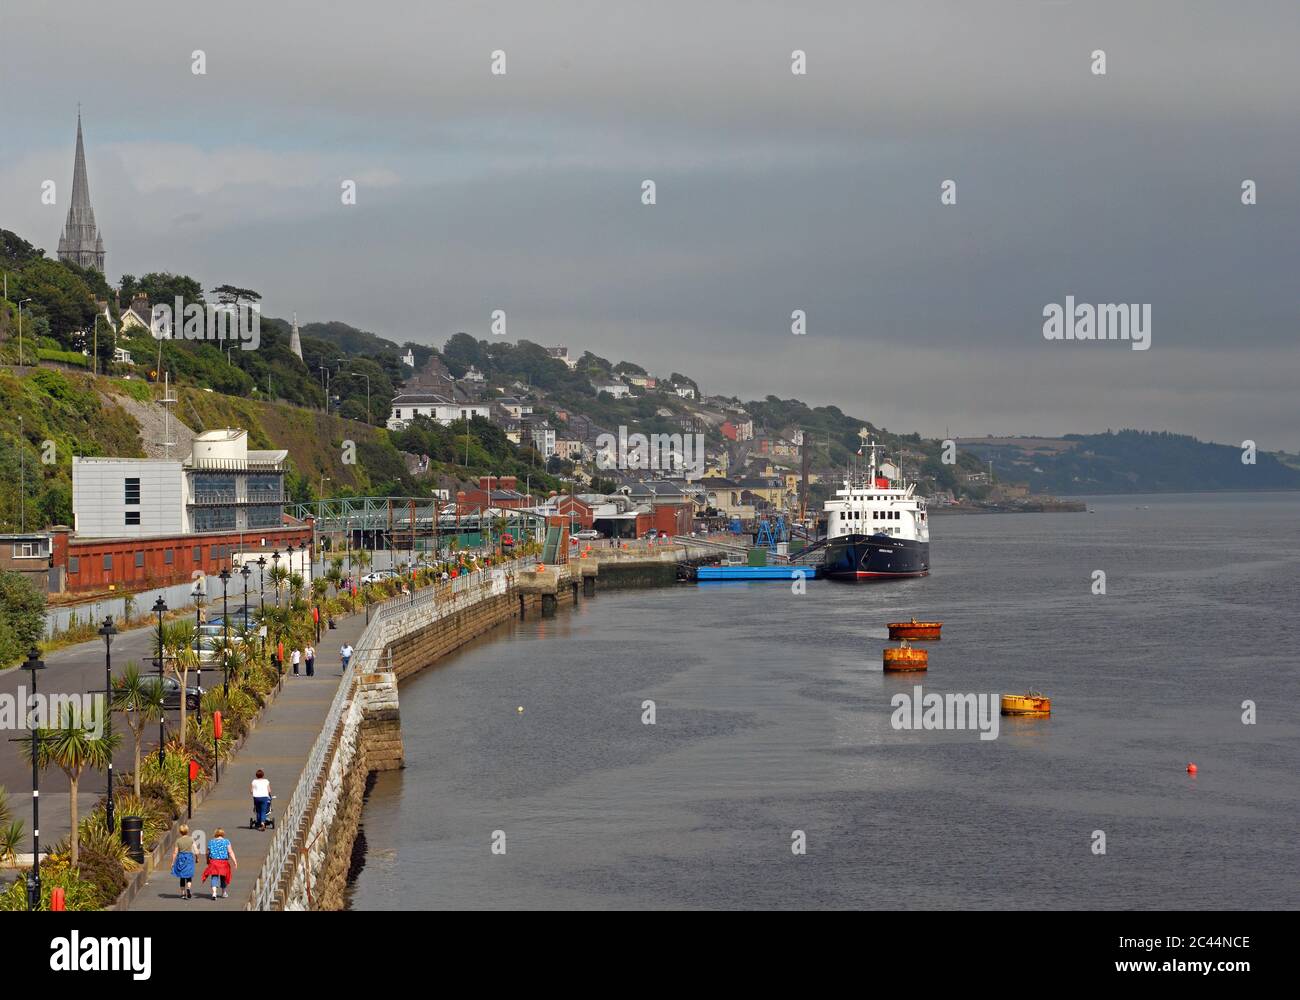 Cobh Cruise Terminal High Resolution Stock Photography and Images - Alamy